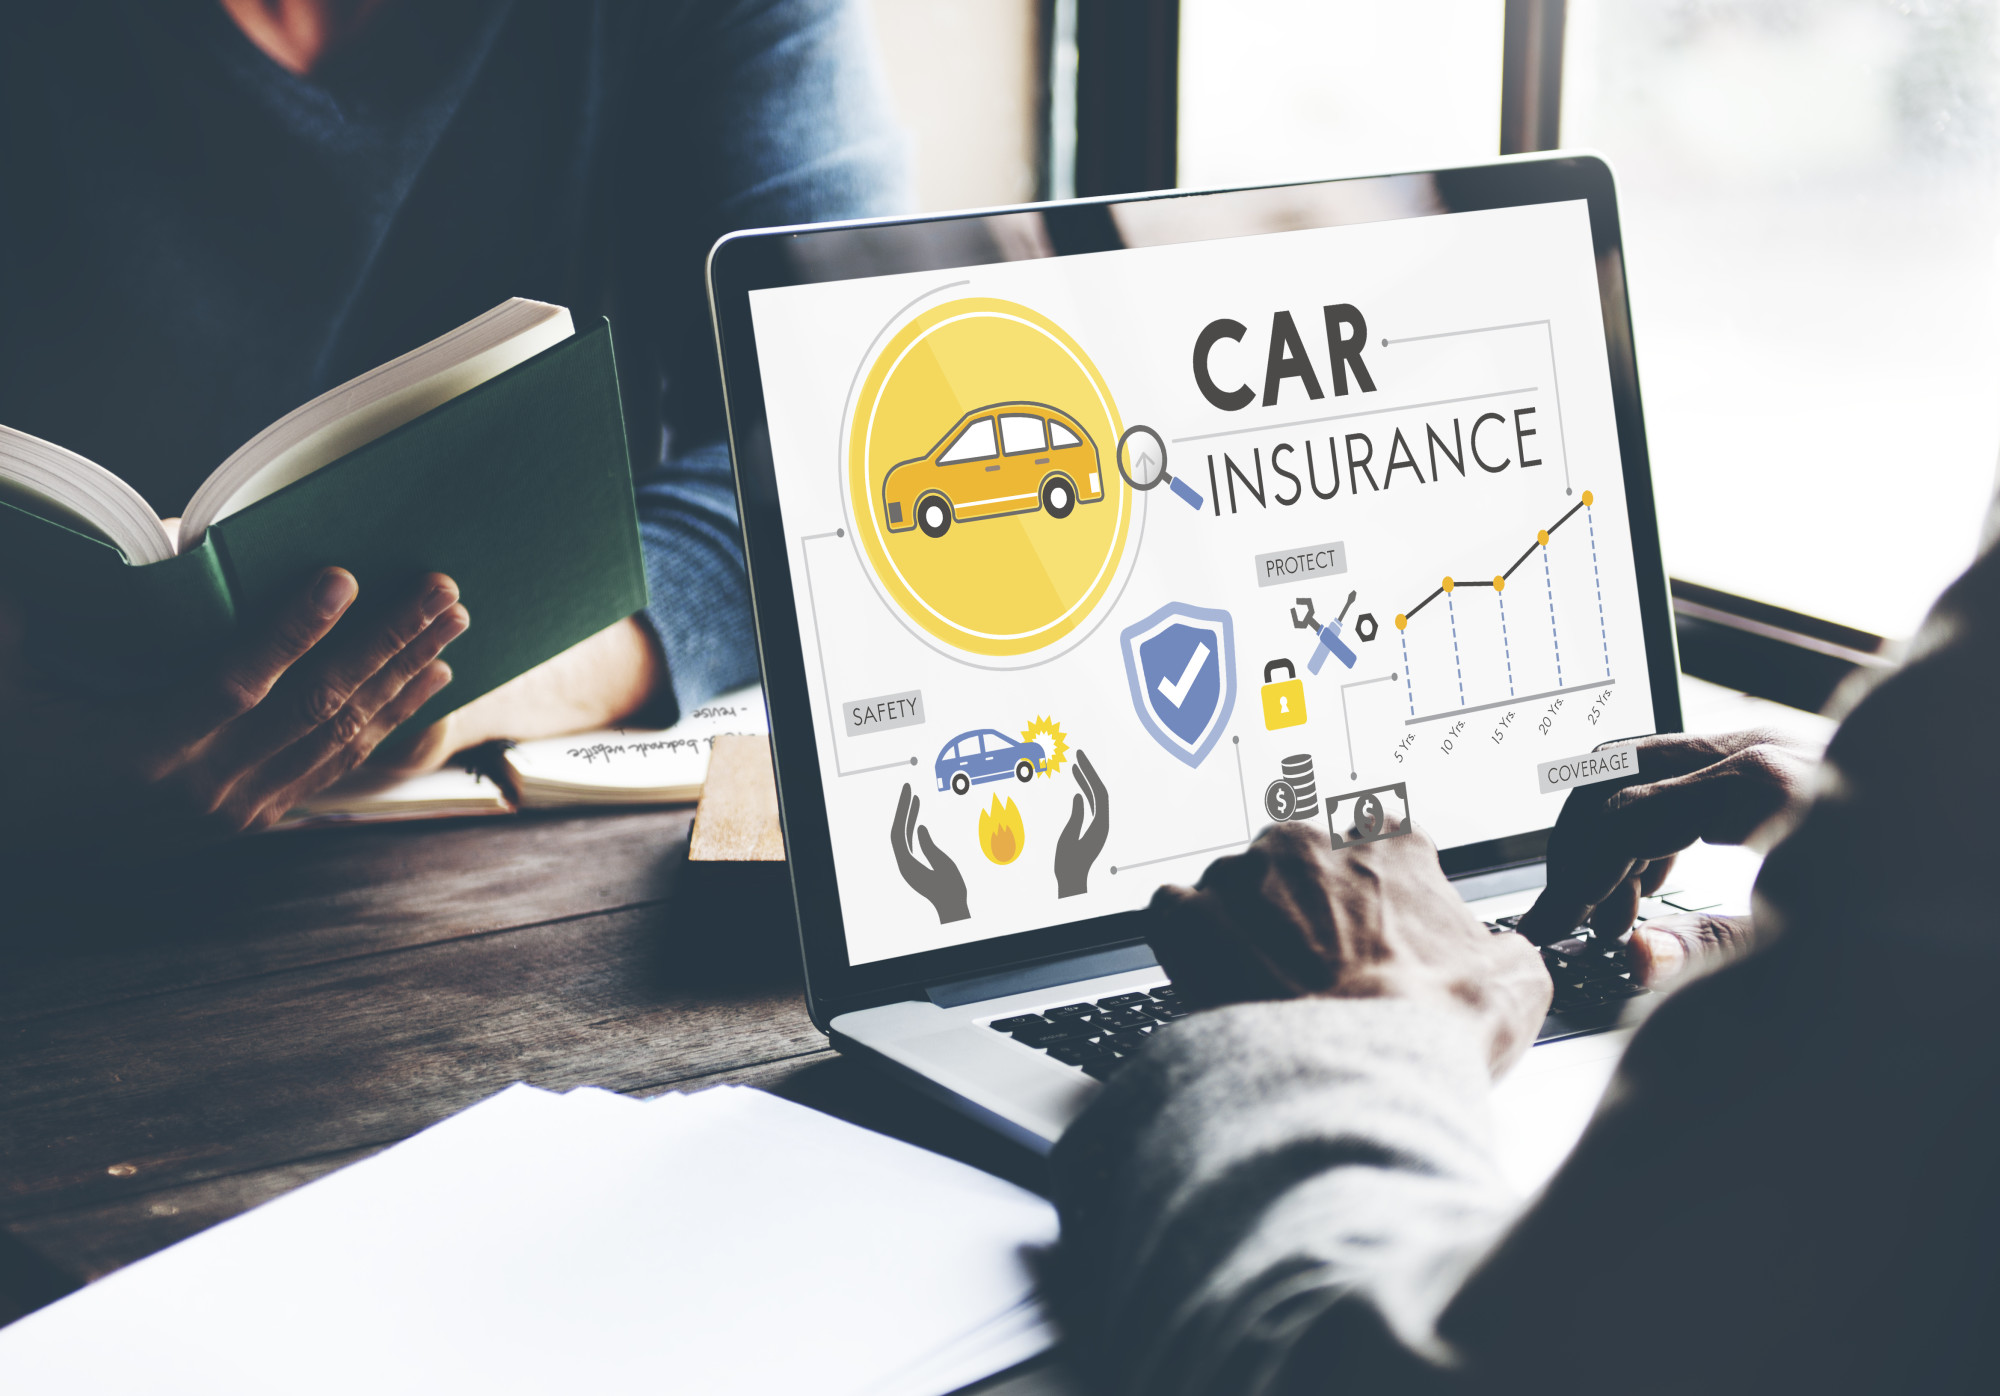 If you own a car you need to get it insured. Read on to learn everything you need to know about insuring your car the right way.